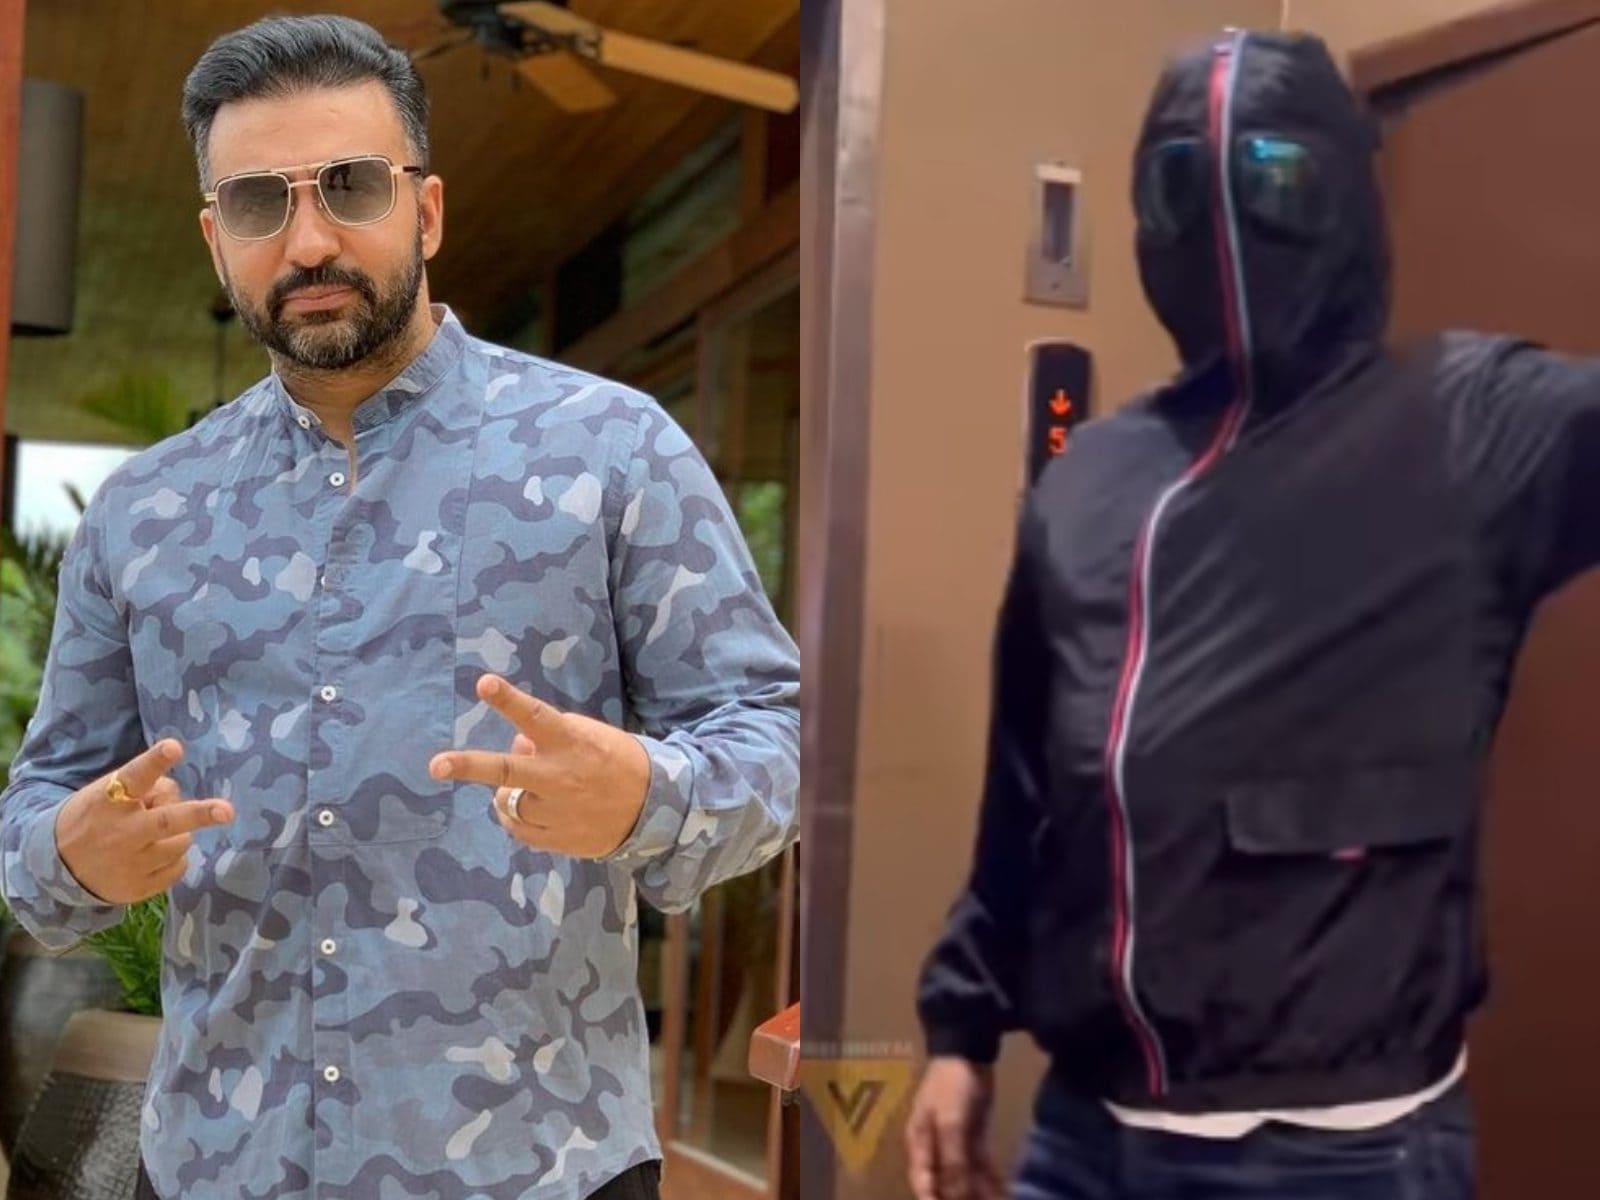 Shilpa Shetty Open Bf Sexy Video - Raj Kundra Completely Covers His Face With Hoodie As He Arrives at Theatre,  Gets Trolled - News18